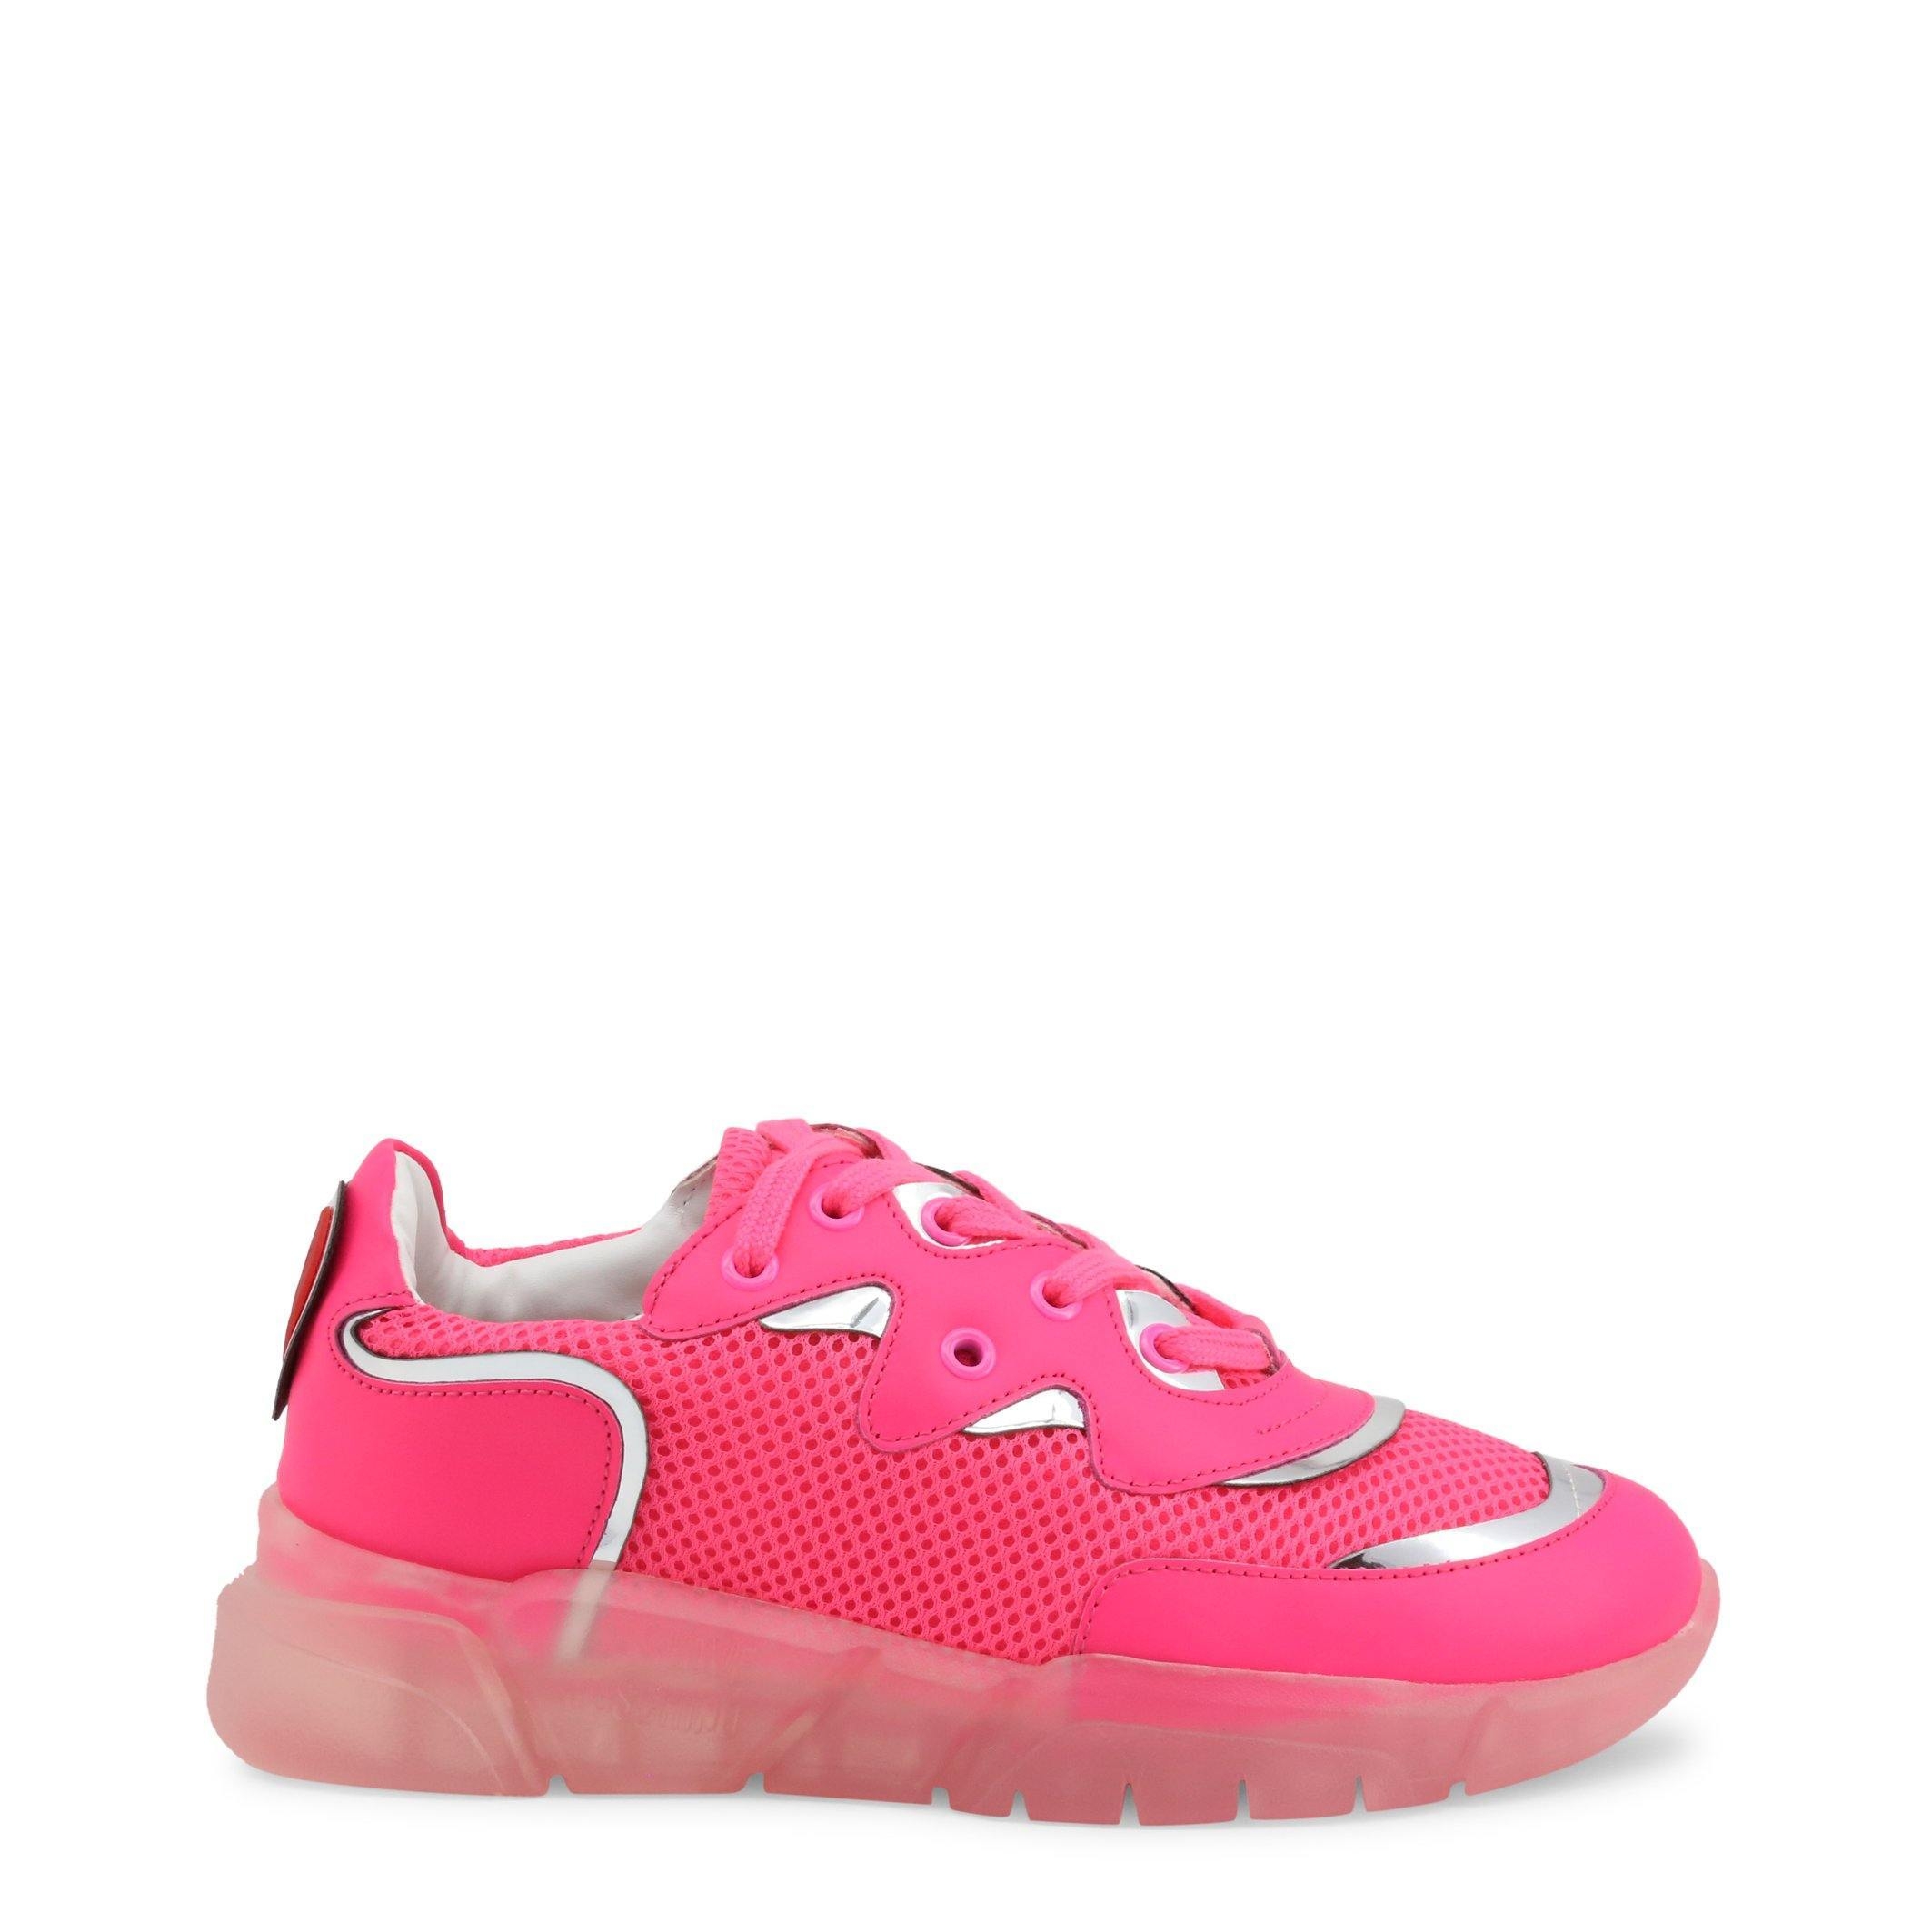 Love Moschino – Women’s trainers in yellow or pink – JA15153G1CIW1 – pink – EU 37